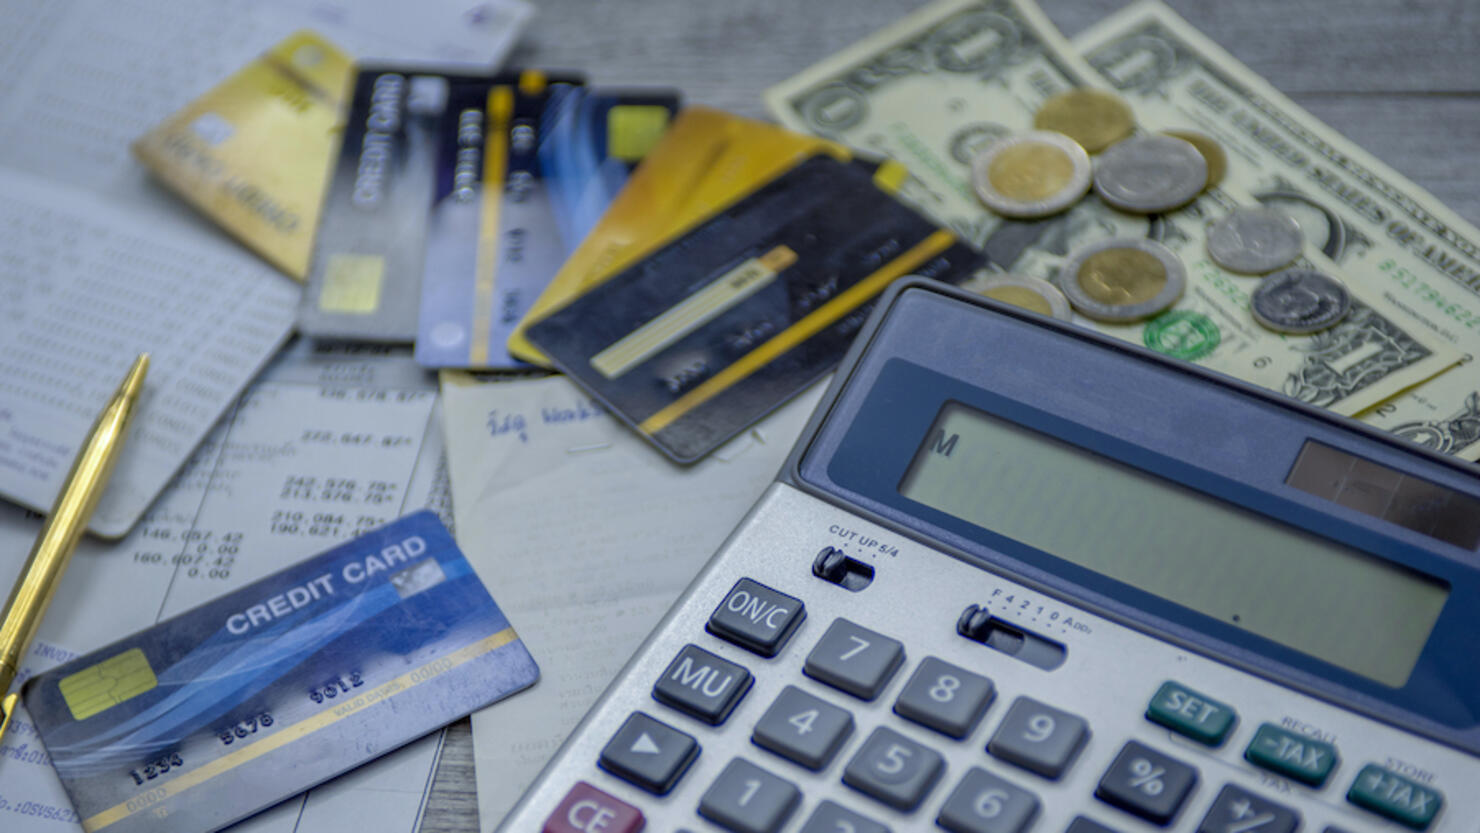 Calculating monthly expenses for credit card debt with banknotes